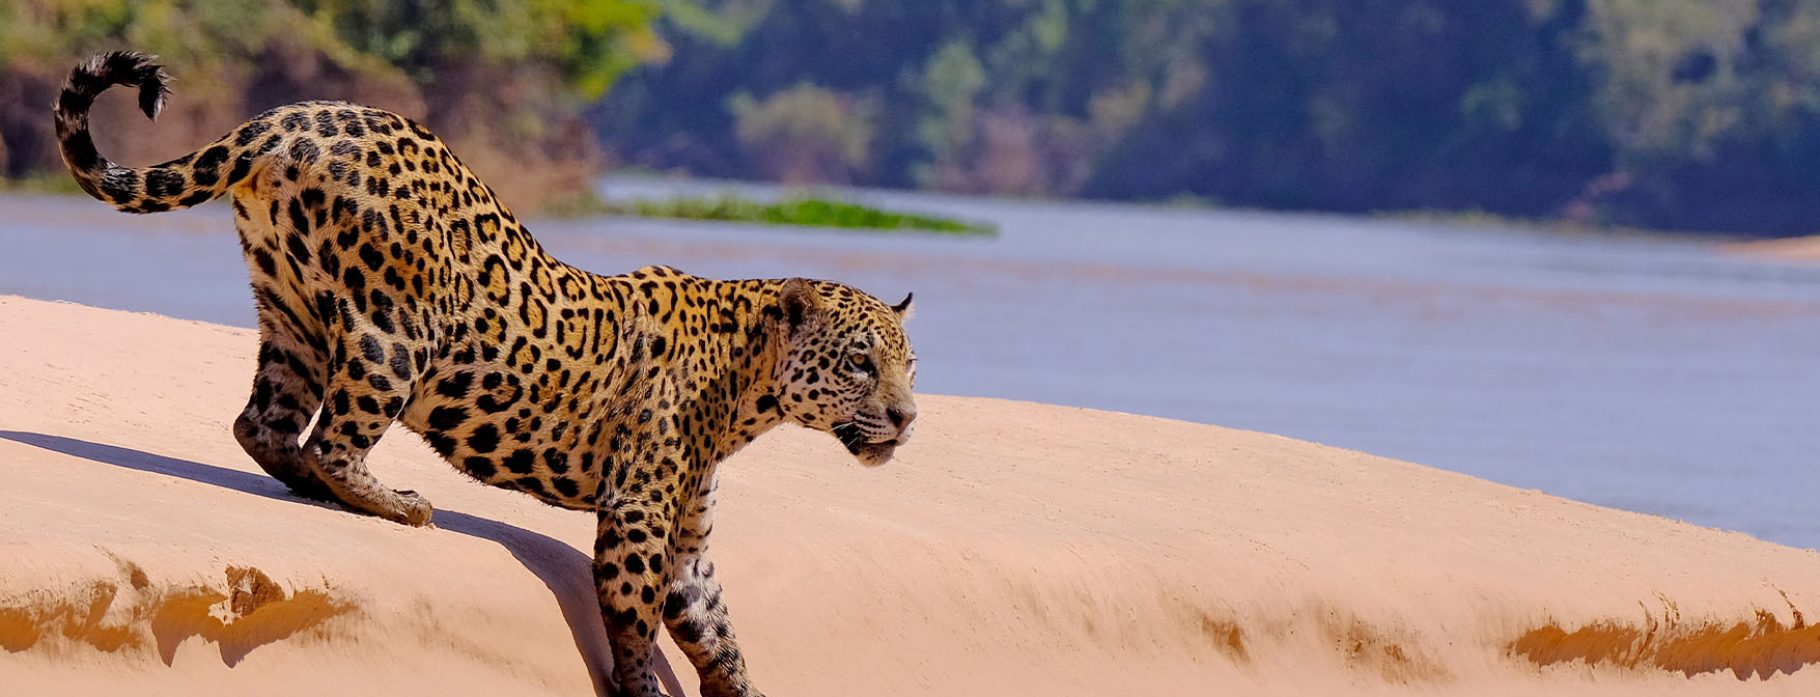 Brazil's Wilderness Quest: Amazon to Jaguarland  with Dr. Charles Munn